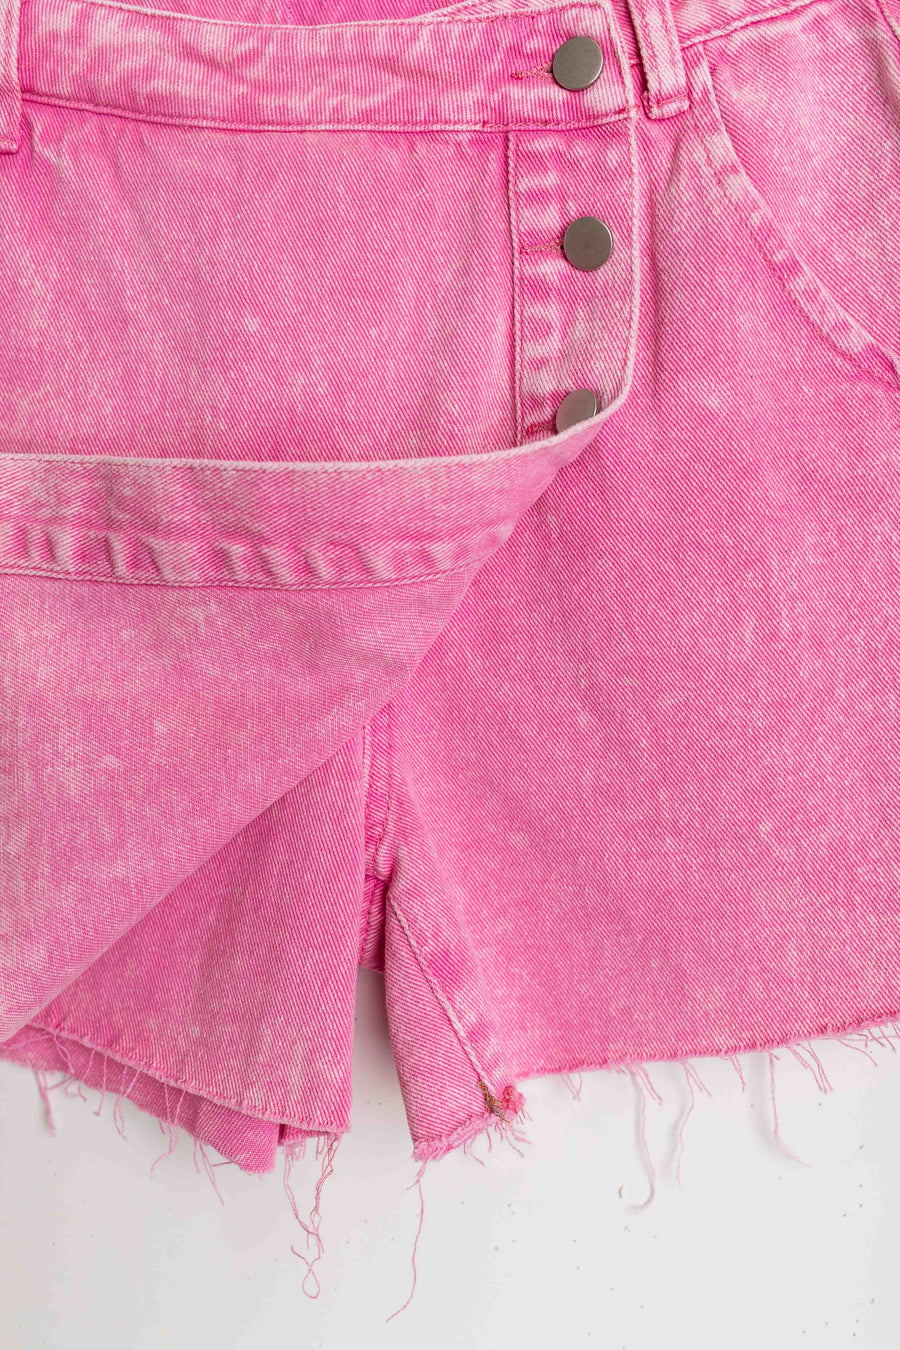 jackieandkate Jeans Shorts pink